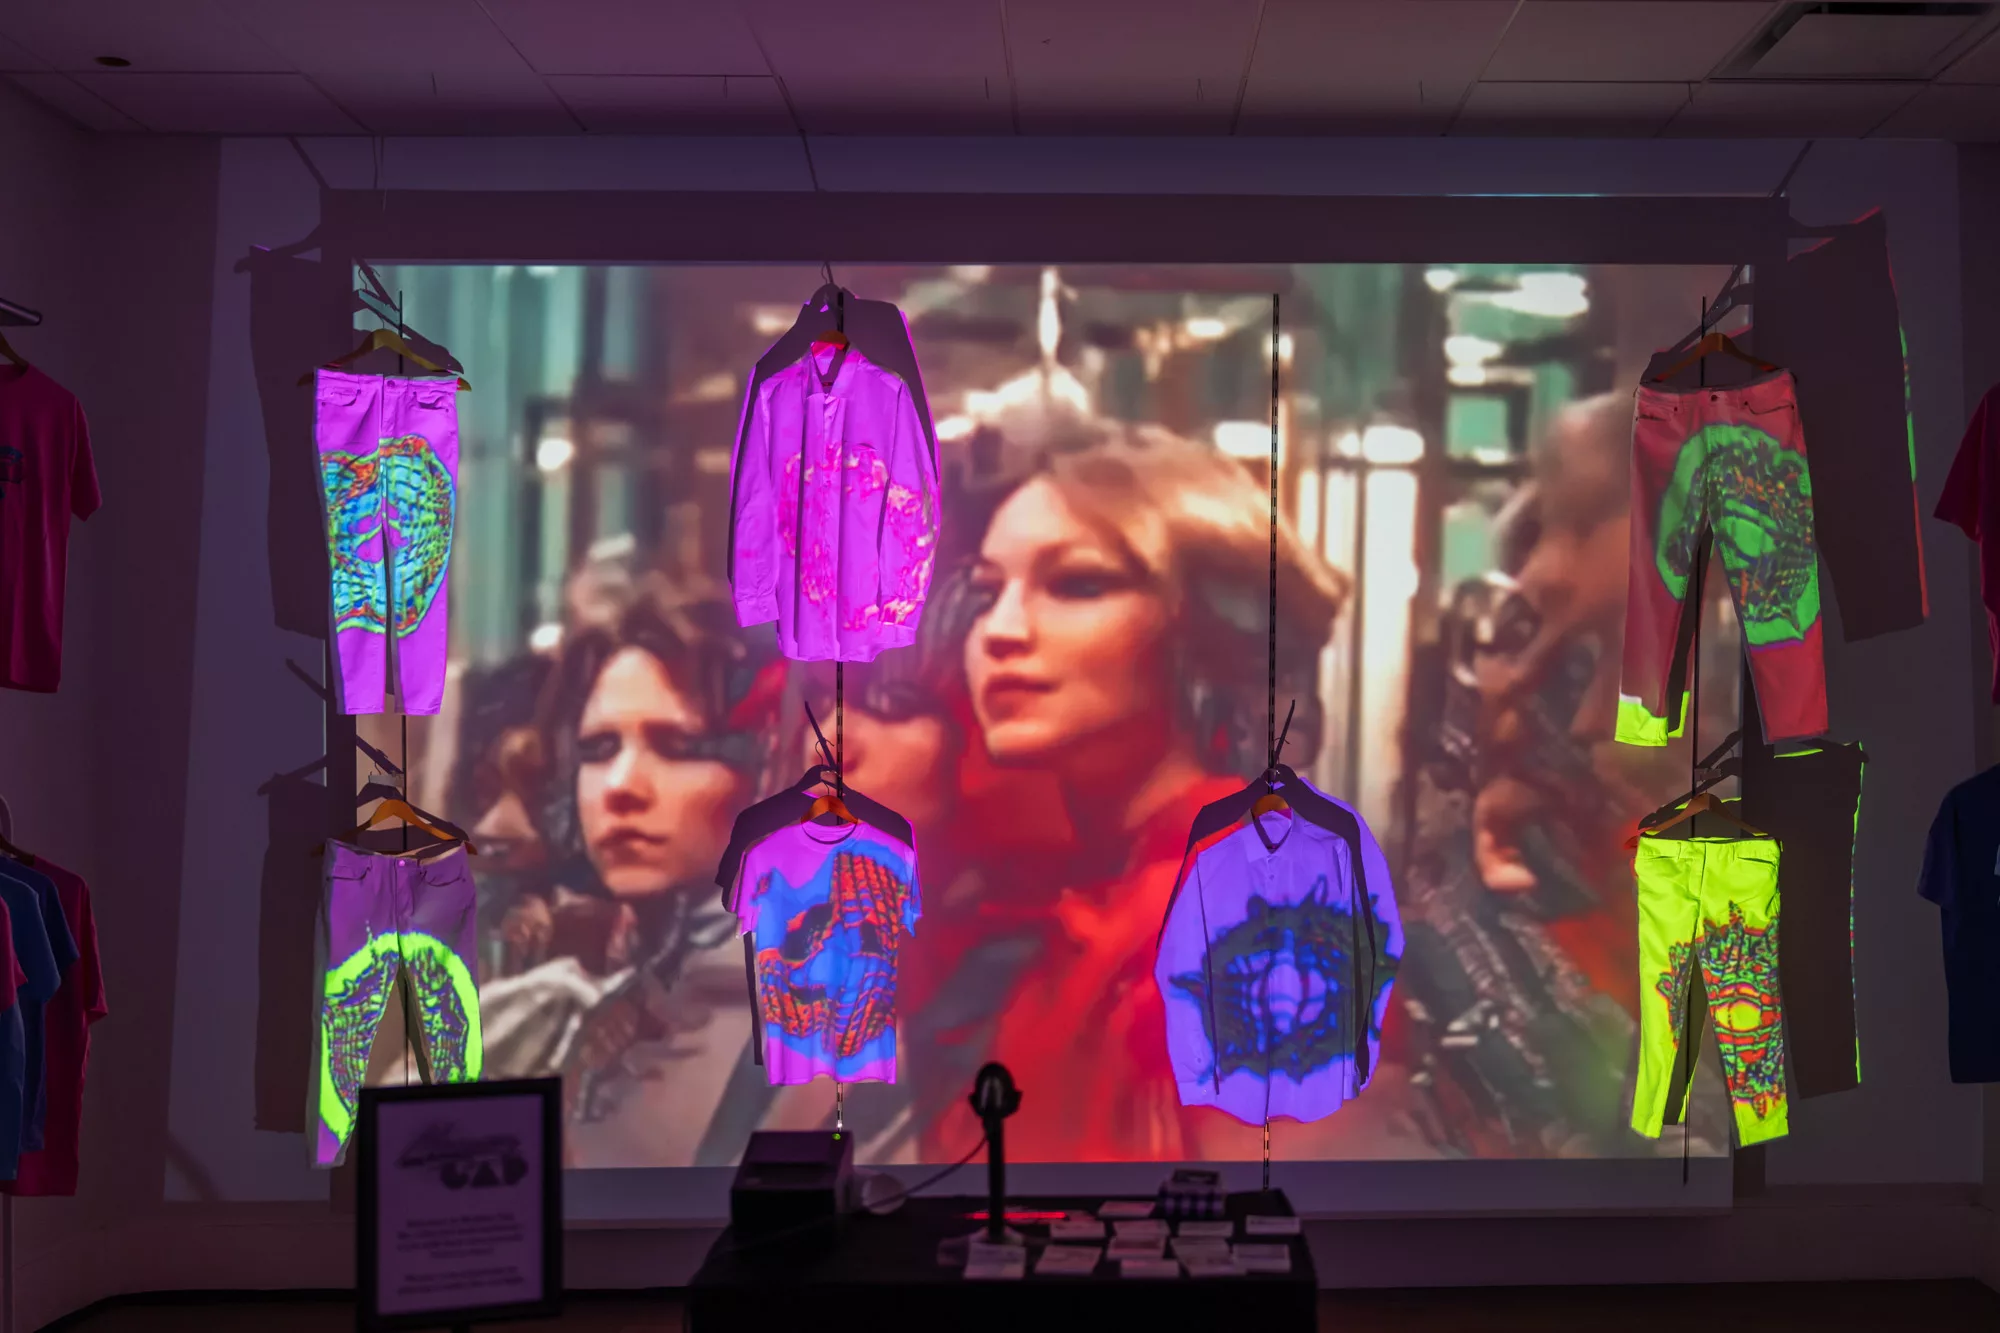 A projected video shines on two rows of shirts and pants that are hung on a wall. Brightly colored, abstract shapes are projected onto the shirts and pants. In the negative space between the clothing, a second video is projected. The second video features two people in outfits indicative of the 80s. A table sits in front of the projection. On the table is a barcode scanner and a receipt printer. To the right of these, also on the table, are a grid of short receipts.